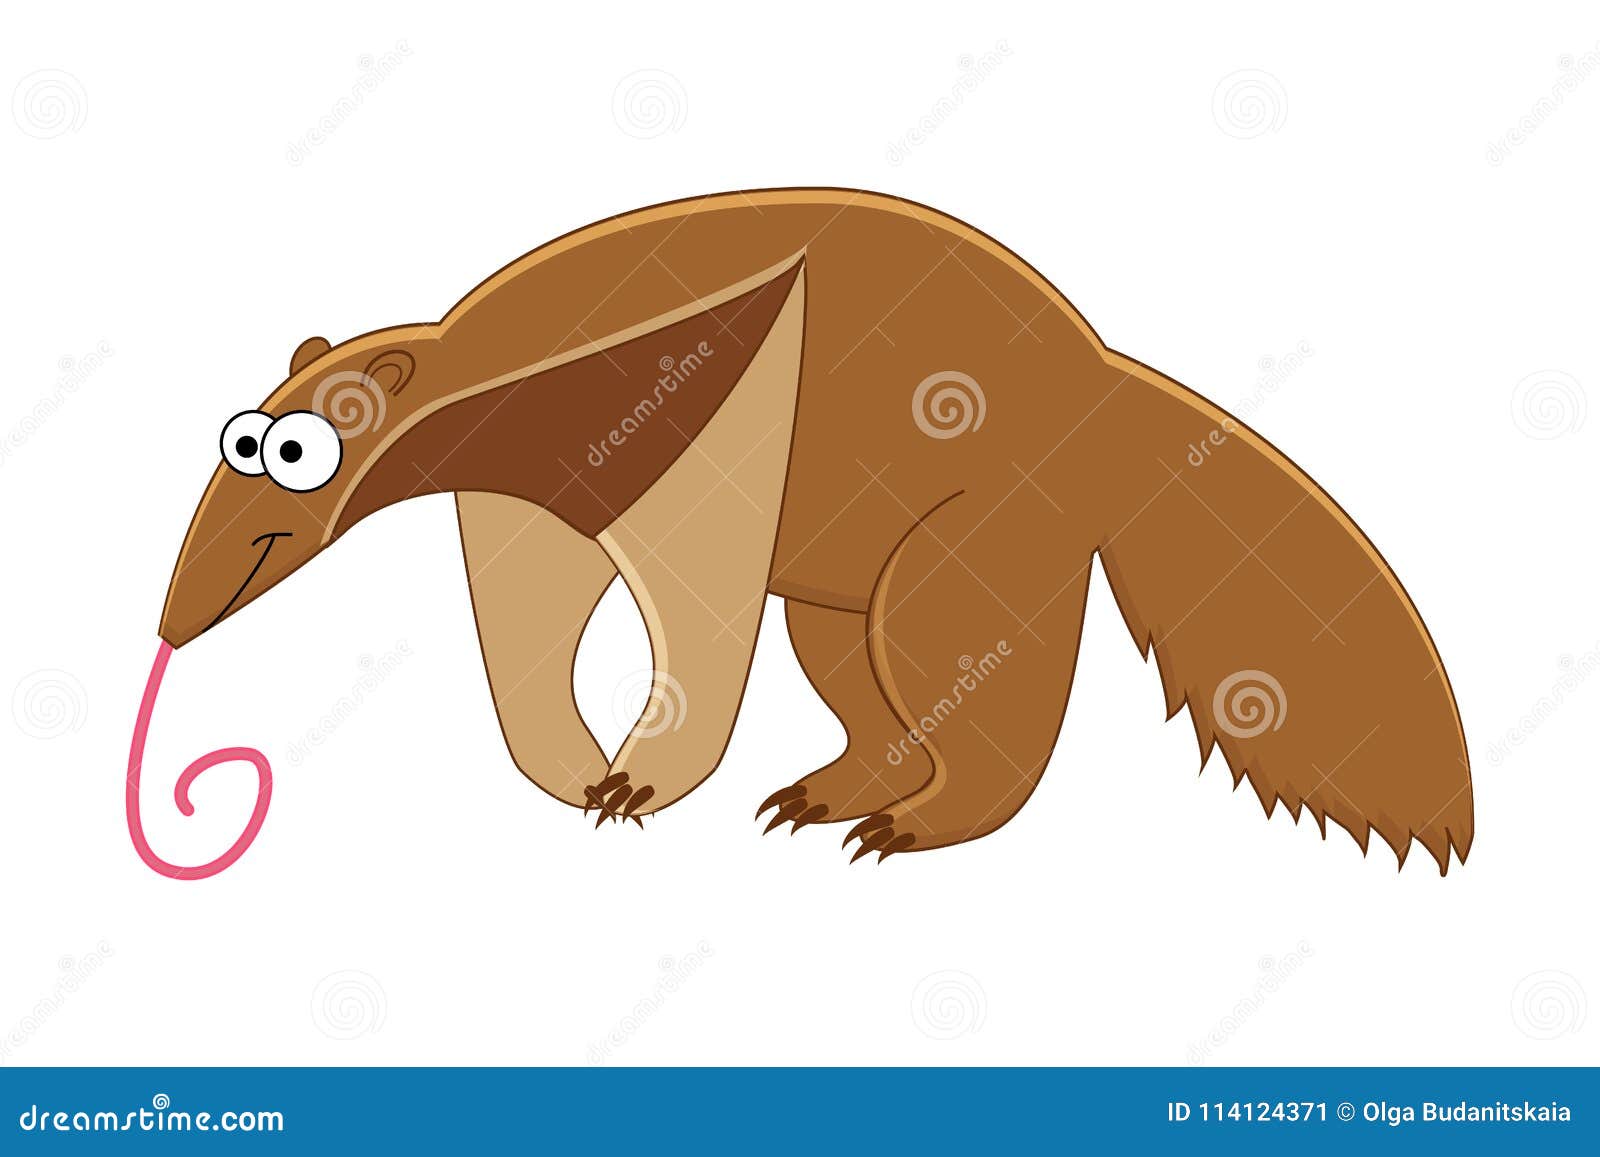 Anteater Cartoons, Illustrations & Vector Stock Images - 682 Pictures to download from ...1300 x 957